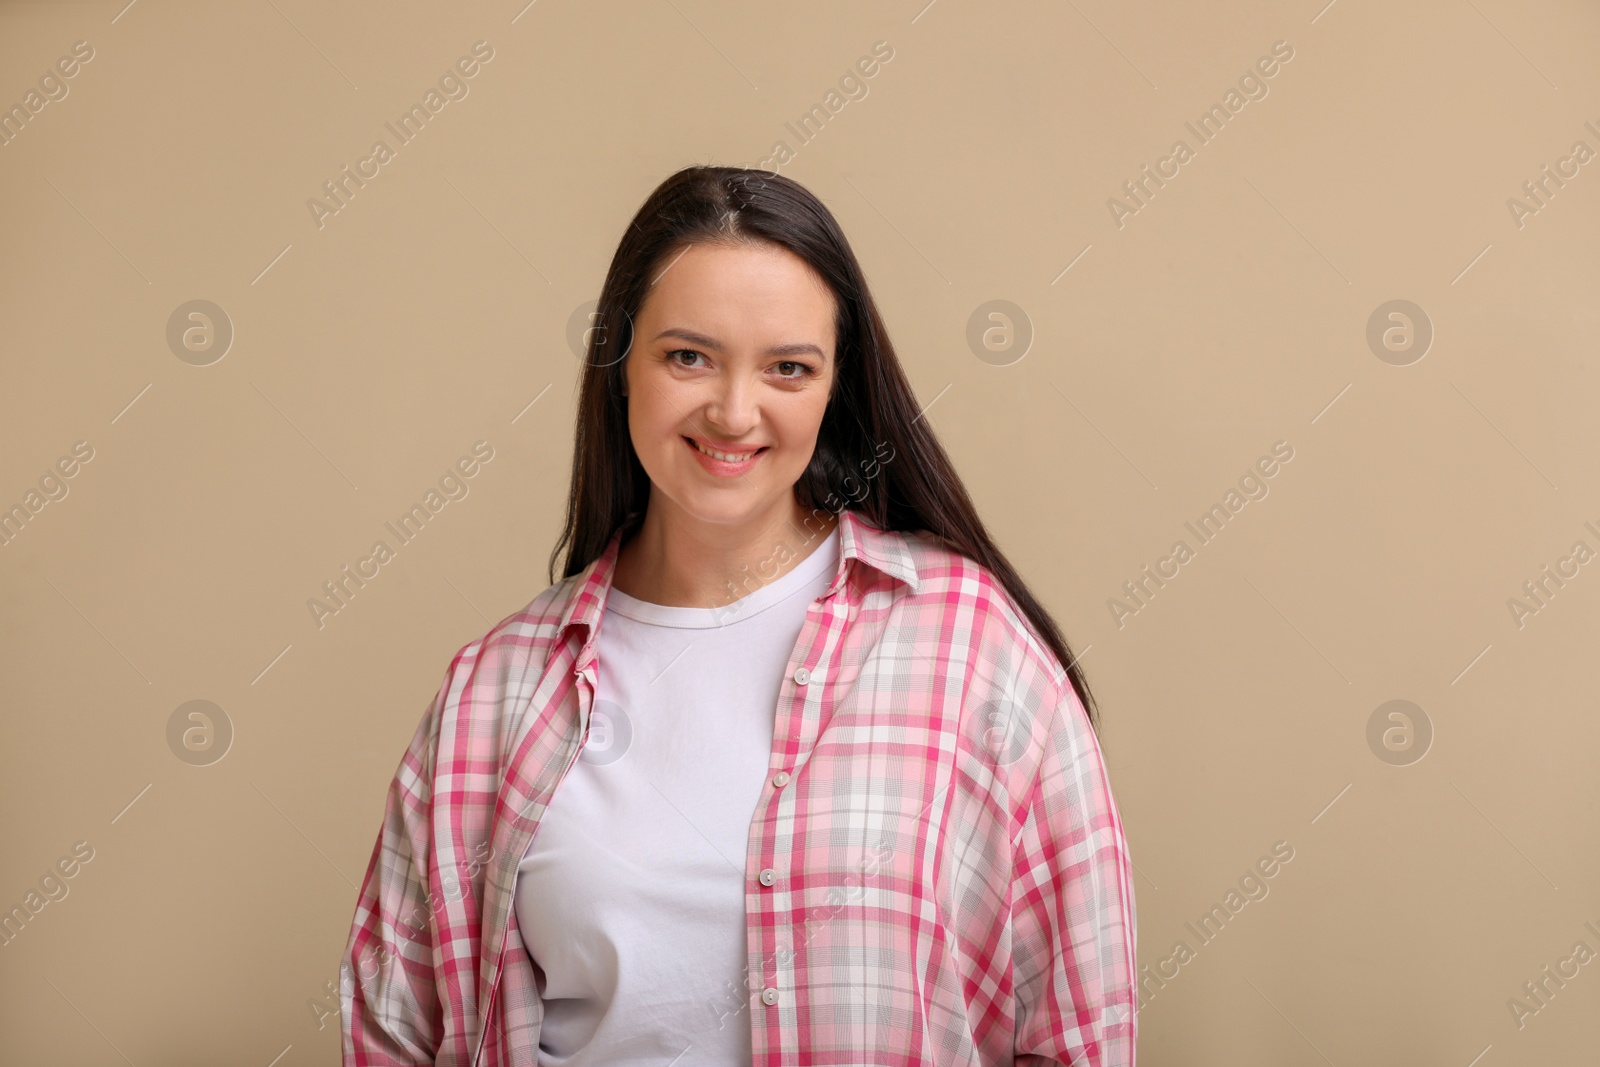 Photo of Beautiful overweight woman with charming smile on beige background